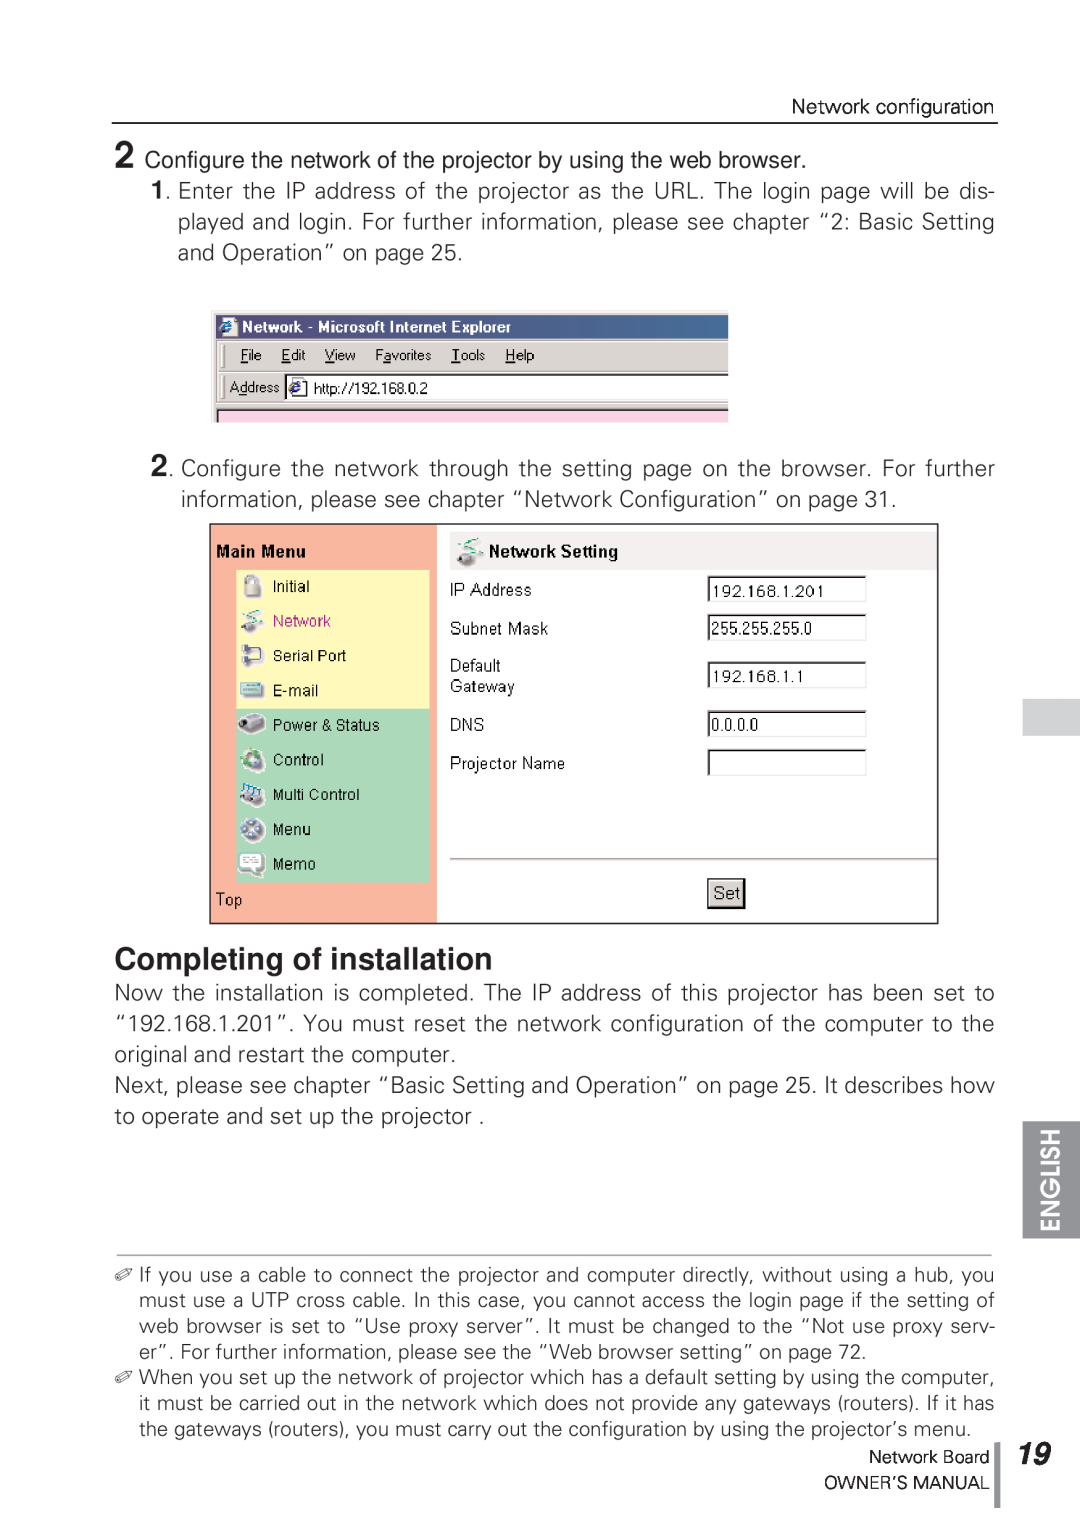 Eiki MD13NET owner manual English, Network configuration 